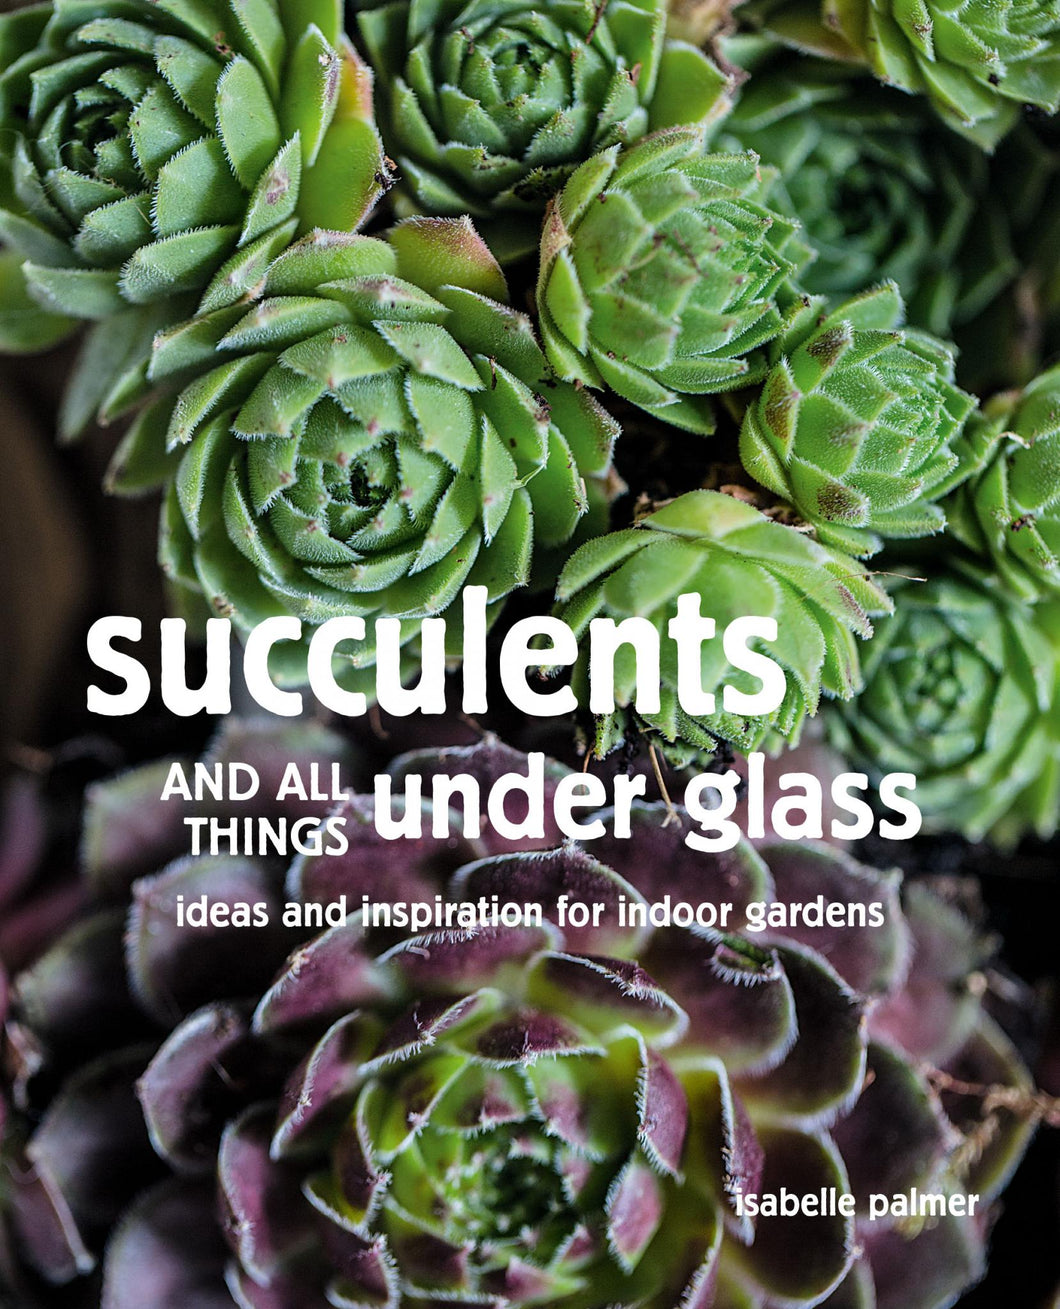 Succulents and All things Under Glass